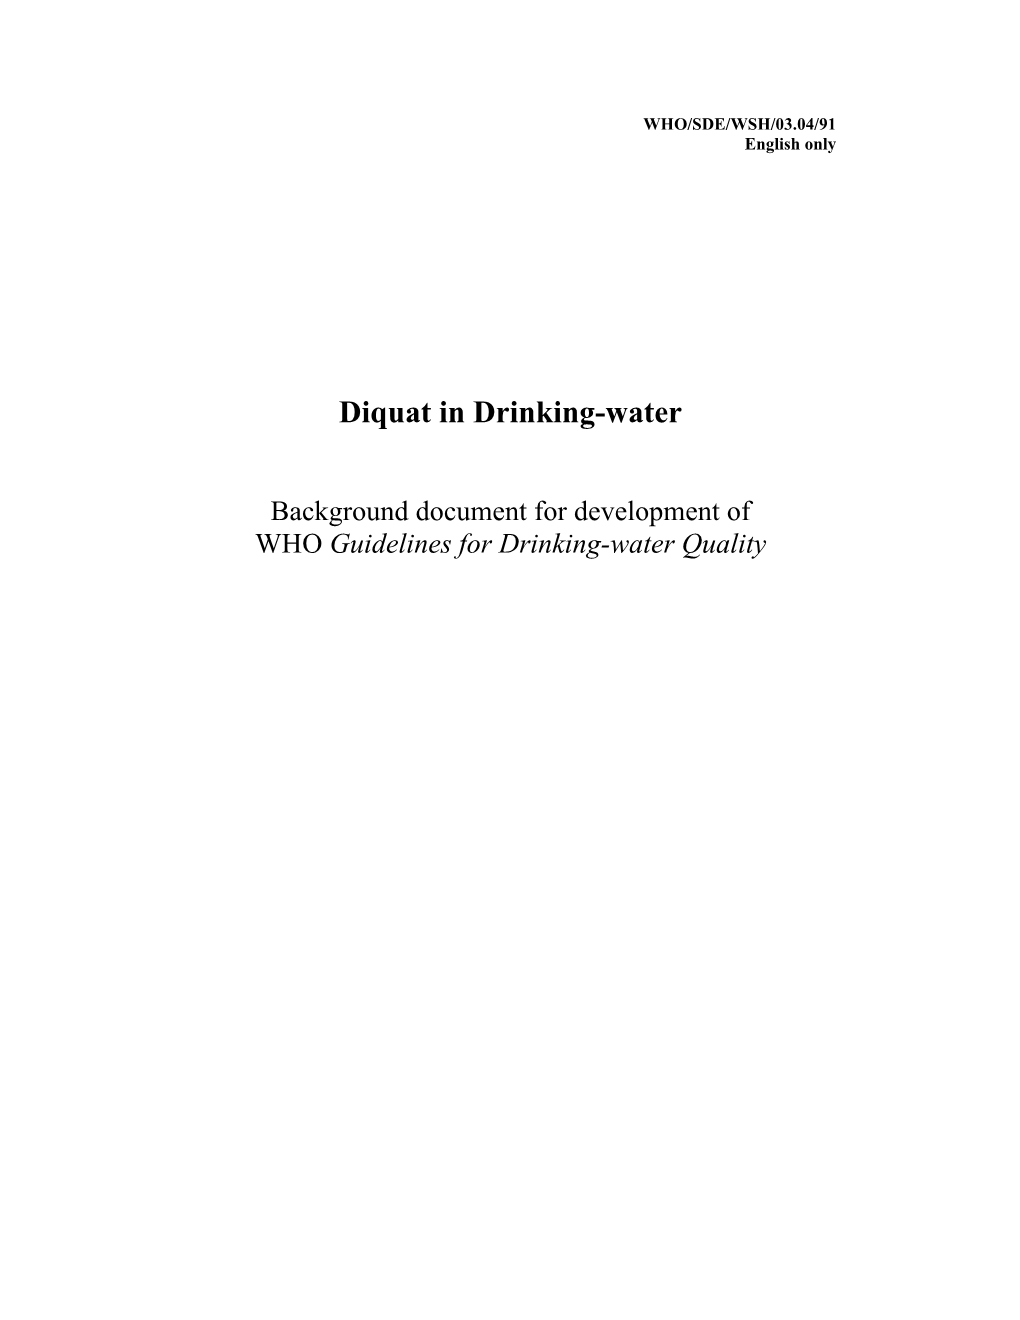 Diquat in Drinking-Water